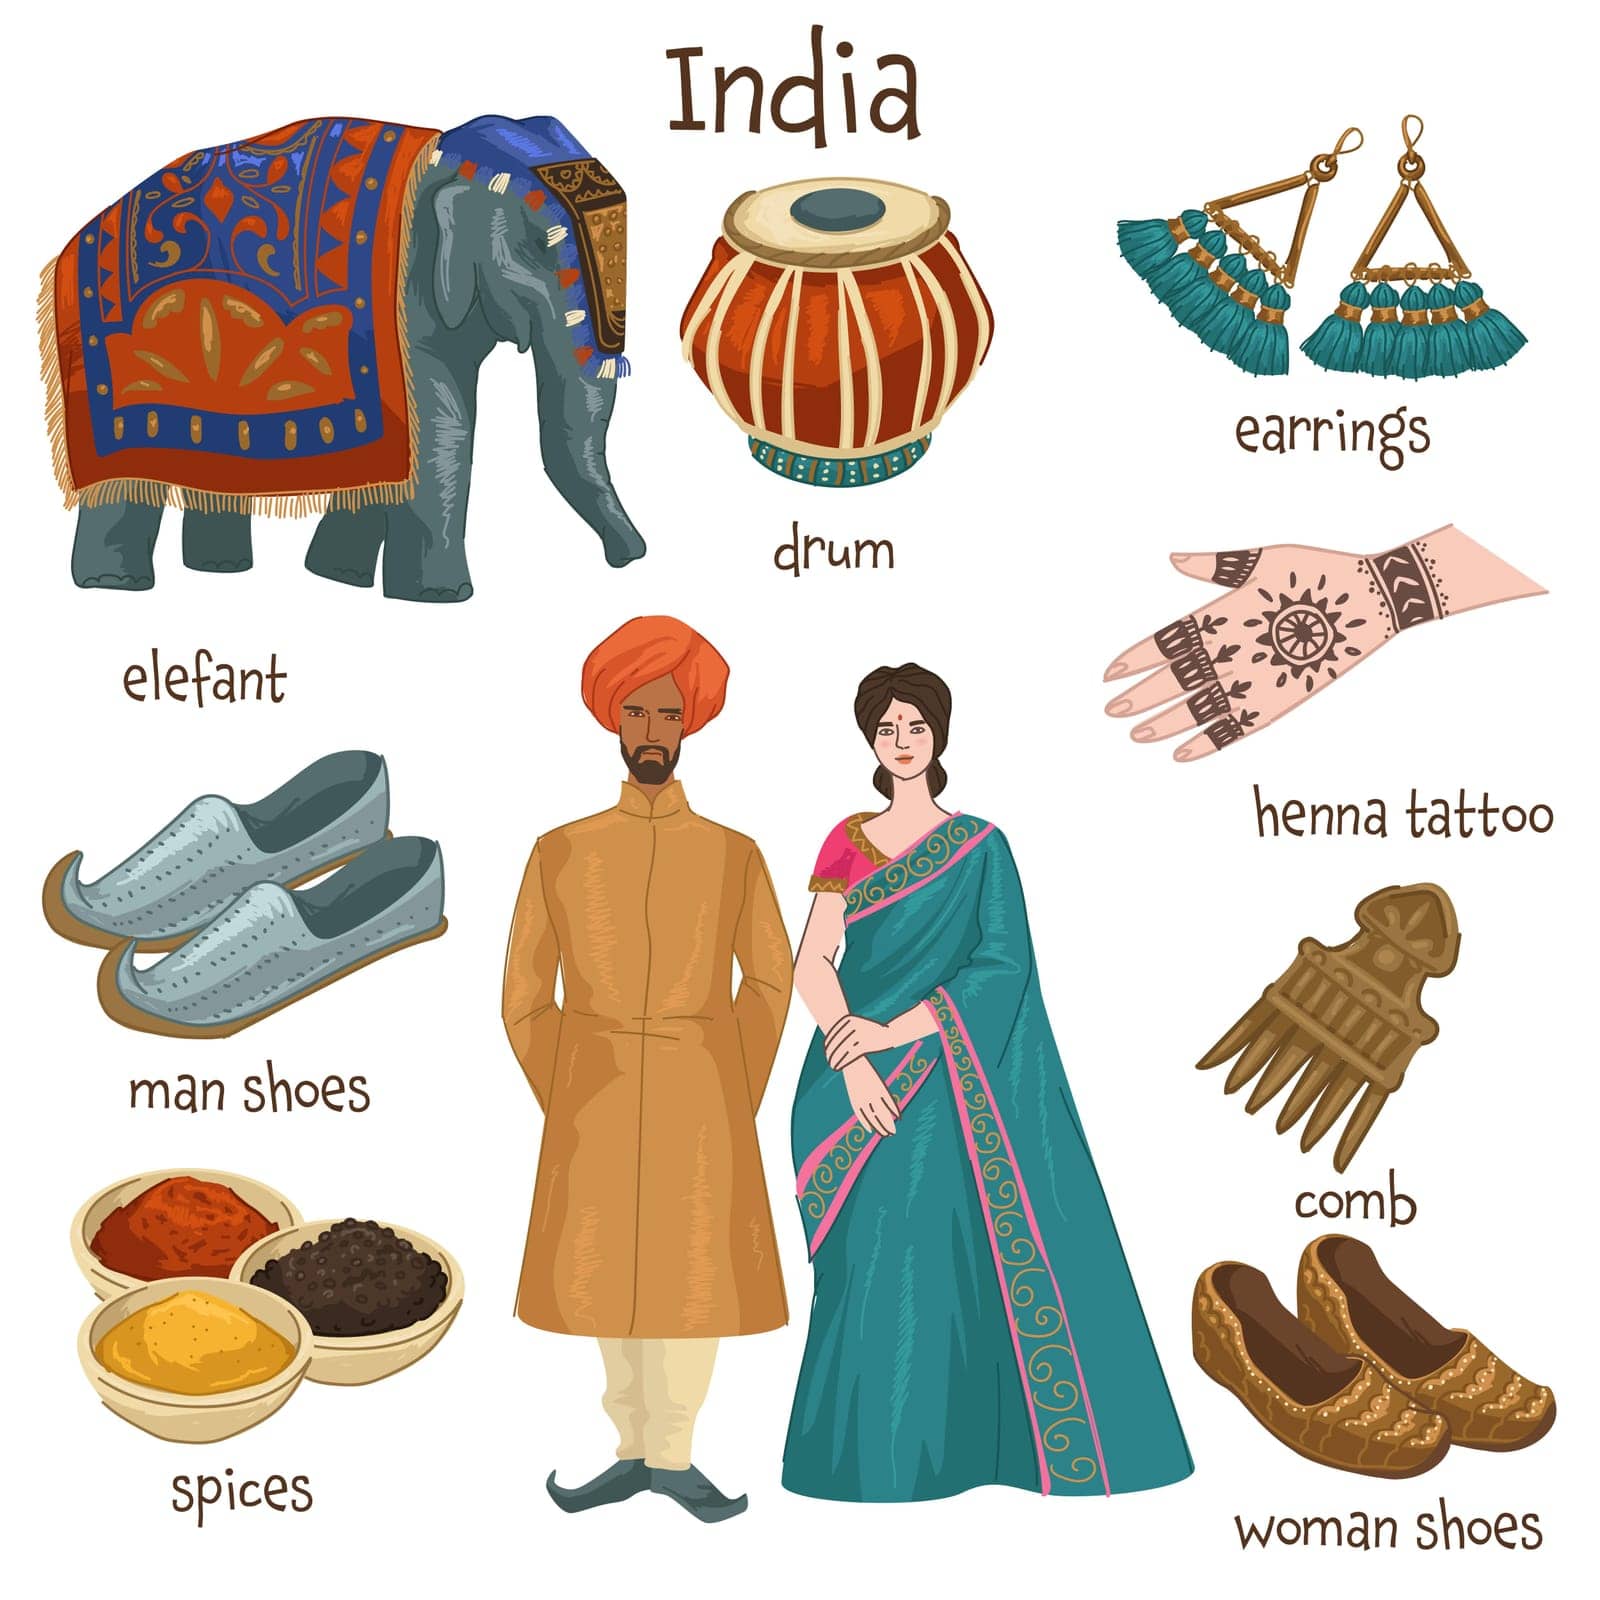 Indian culture, clothes and personal belongings by Sonulkaster